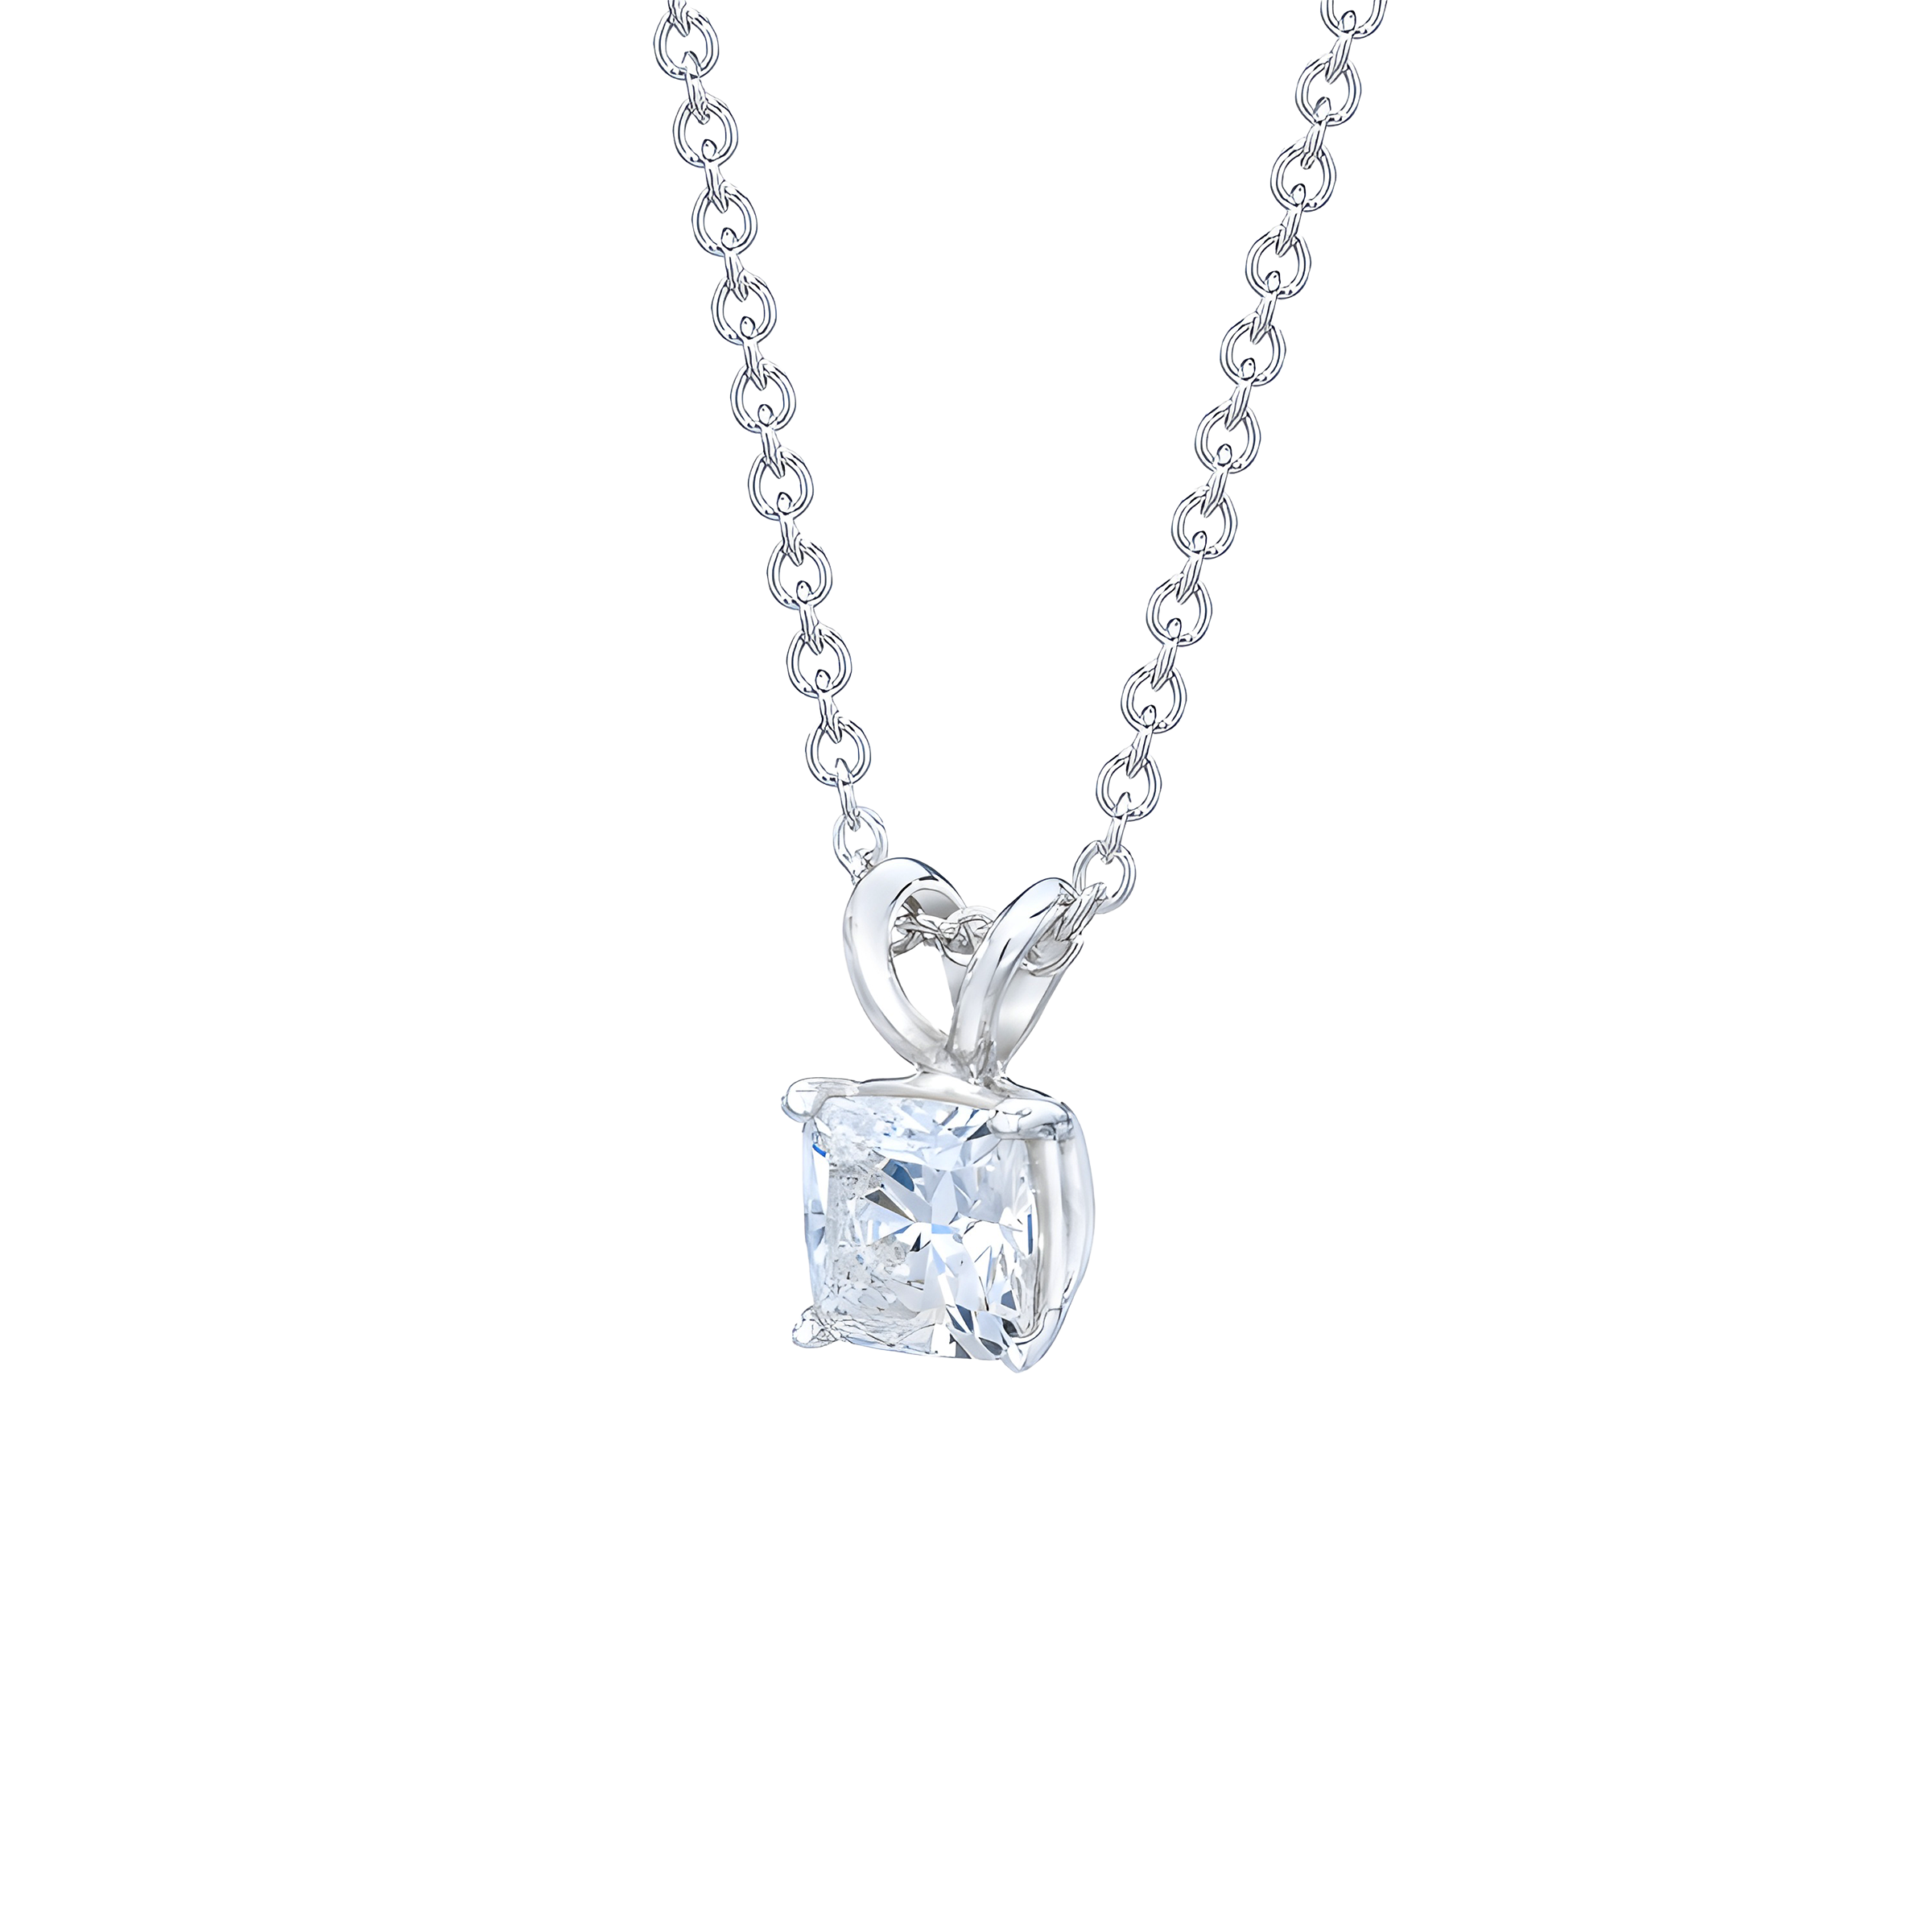 Cushion Cut Solitaire Diamond Pendent Necklace in 18k White Gold